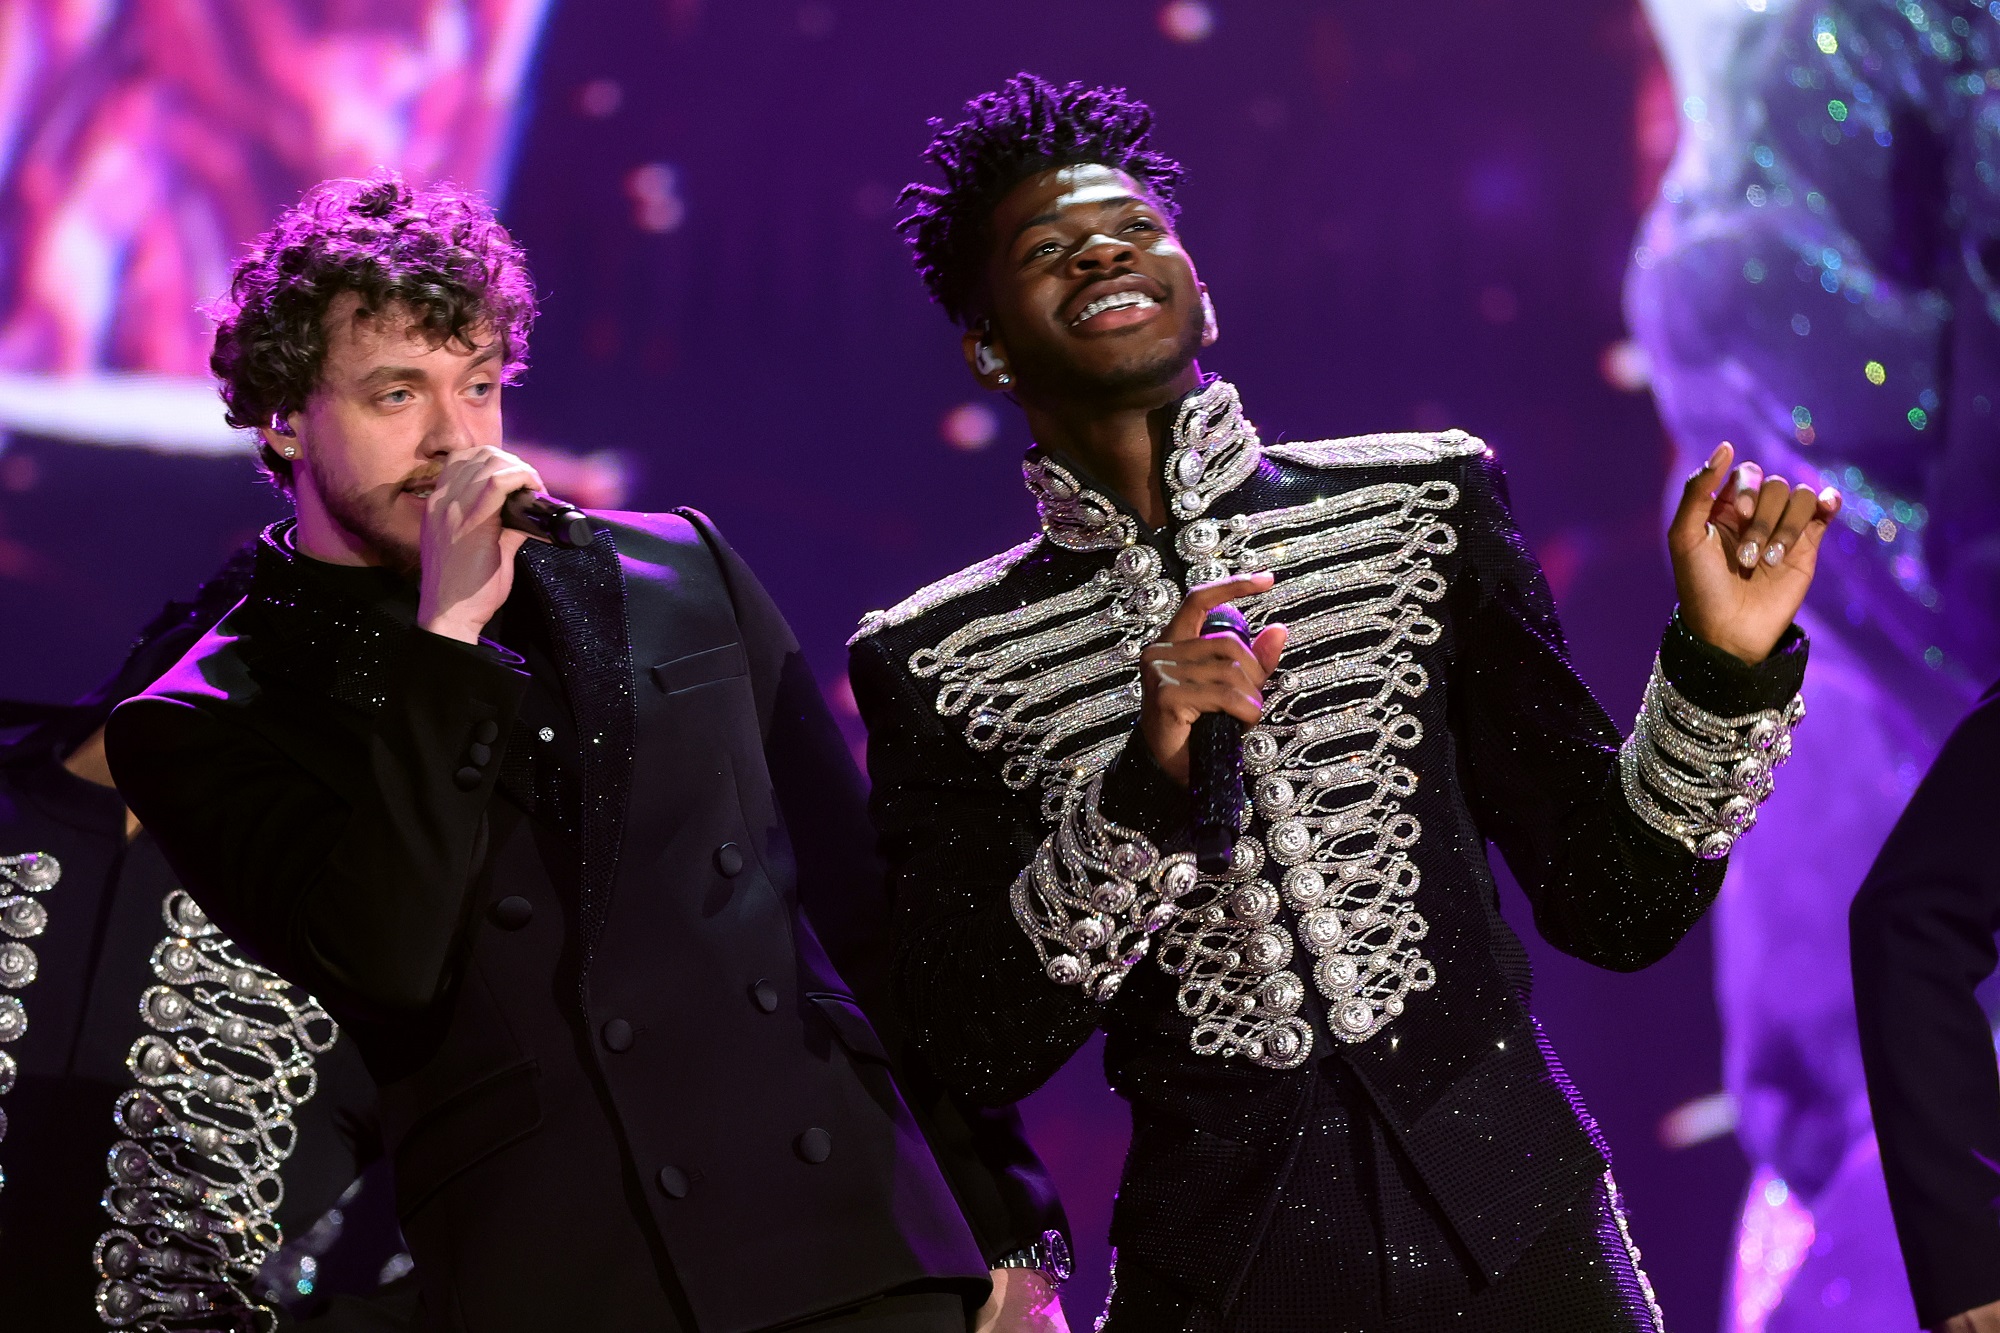 Jack Harlow and Lil Nas X performing at the 2022 Grammy Awards